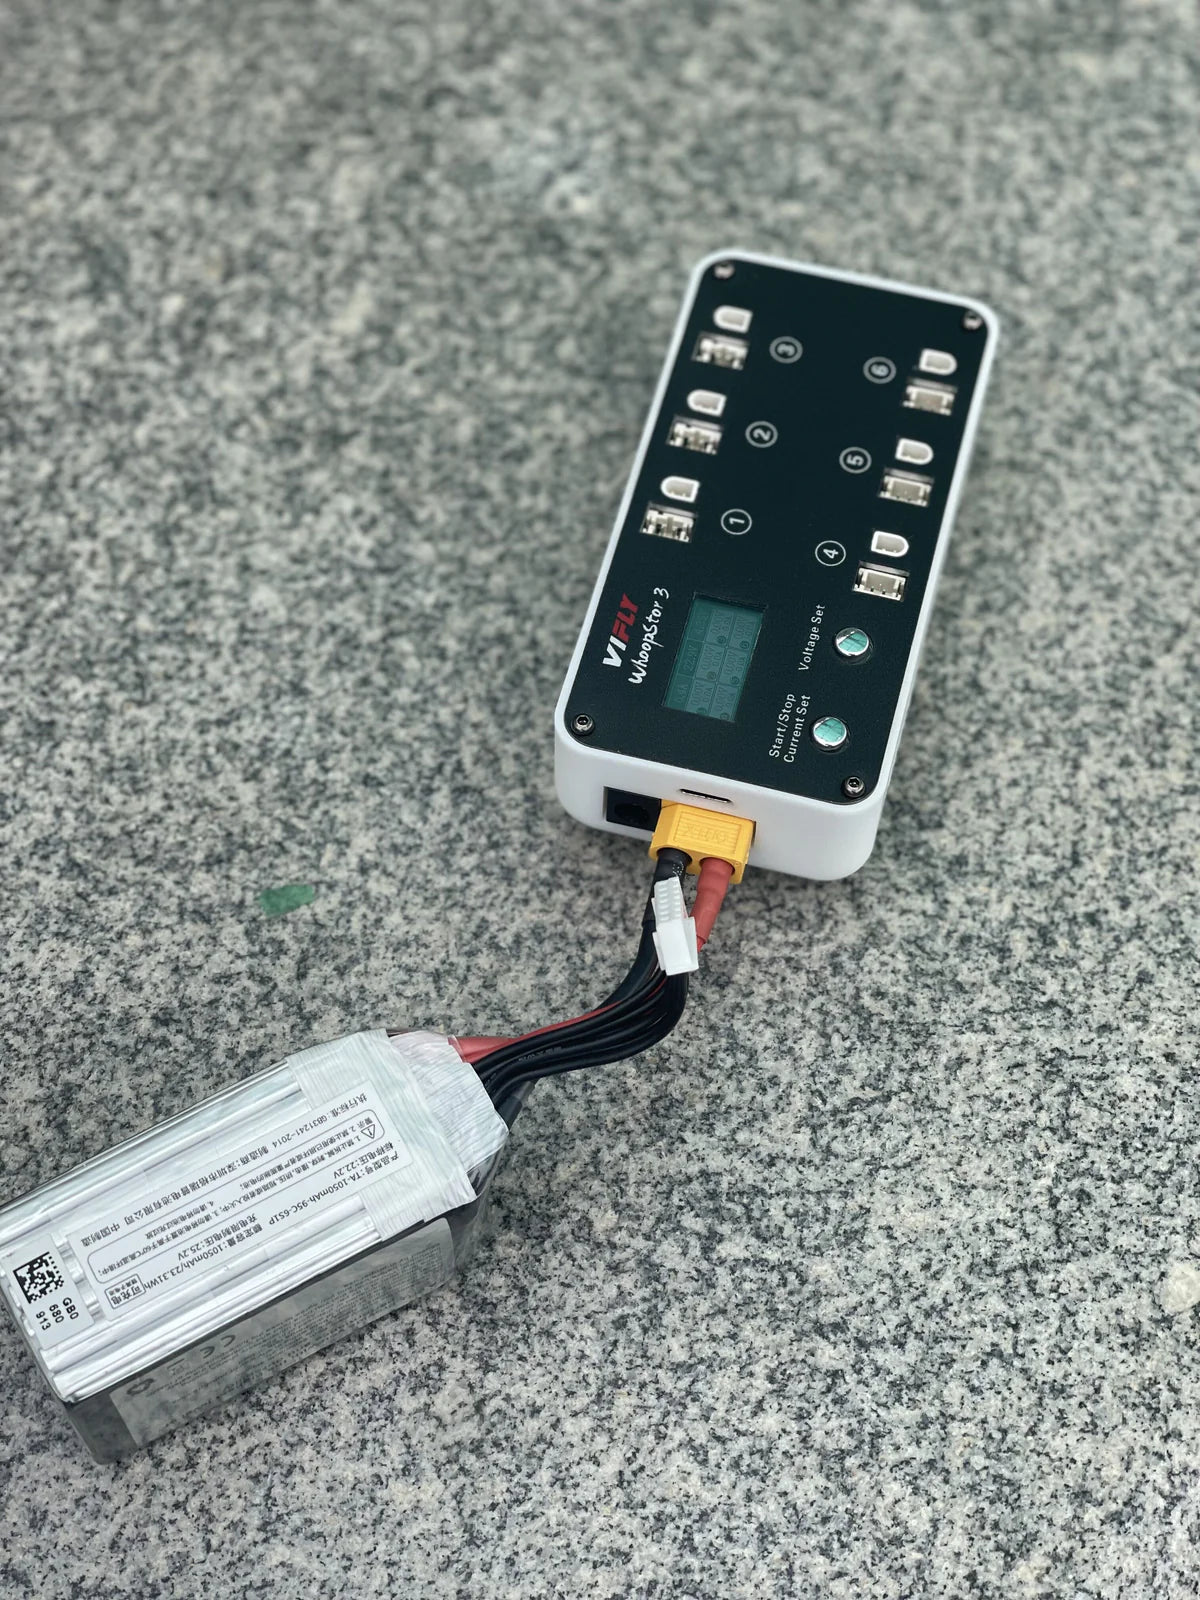 VIFLY WhoopStor V3 40W 1S Lipo Battery Charger/Discharger with BT2/A30/PH2 Connector Compatability